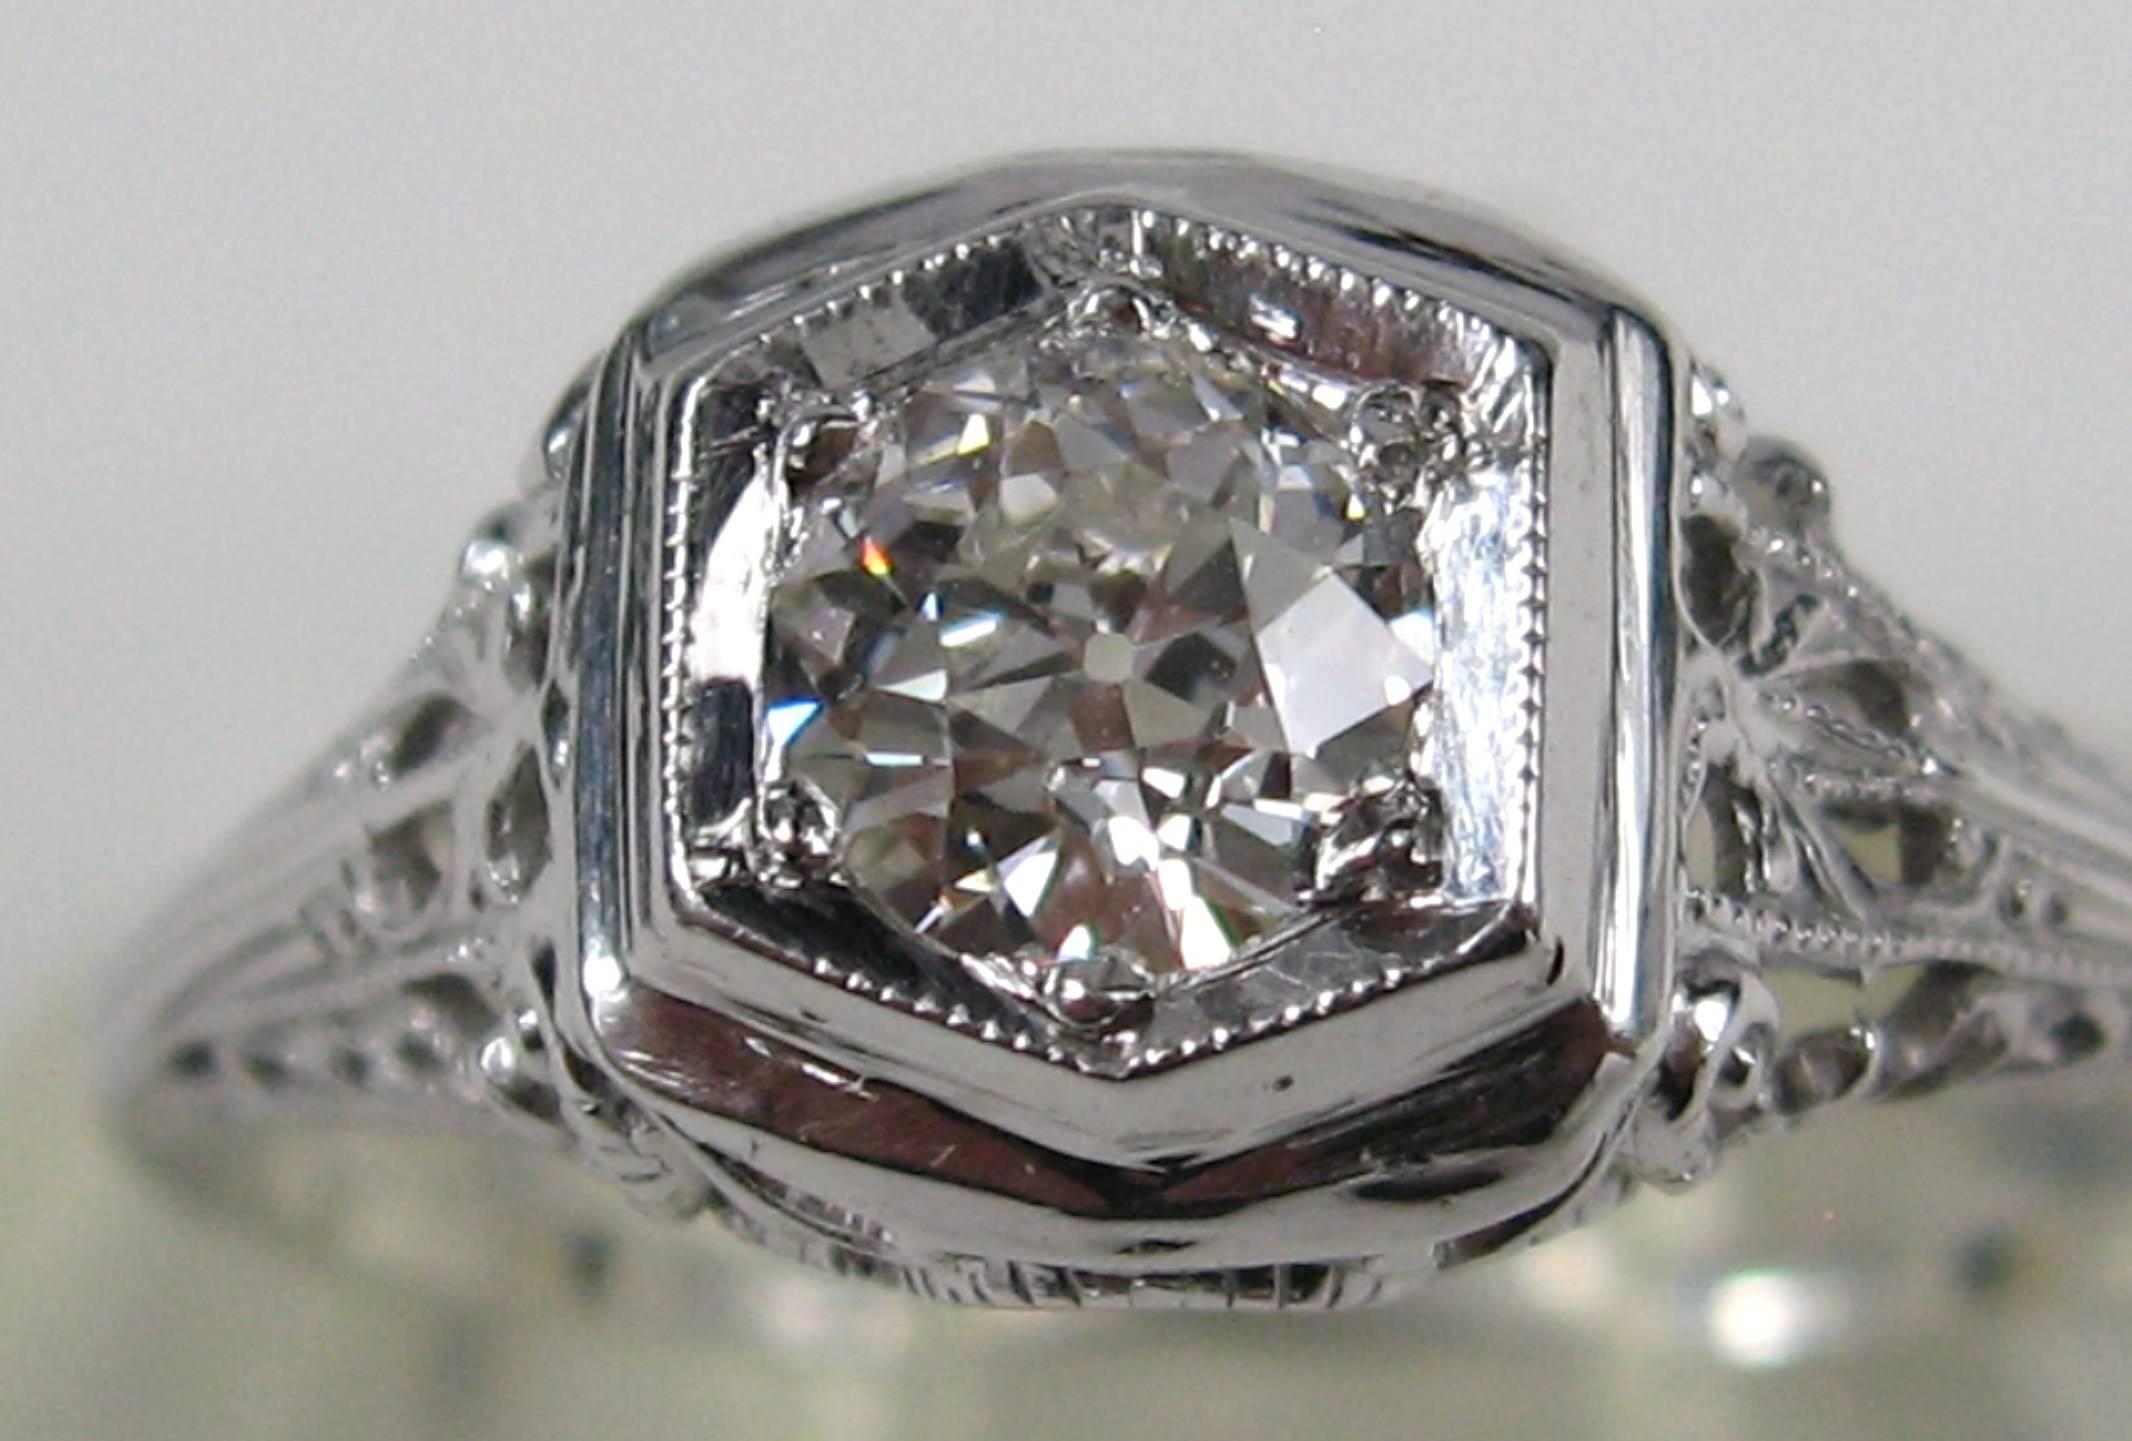 1920's 14K White Gold Art Deco Engagement Diamond Ring. White Gold Diamond Ring Perfect for a promise or engagement ring wonderful open work motif. Diamond is VS Color G/H Stone Measuring 5.10 x 5.10 x 3.0 .50 Carats. The ring is approx a size 8.5